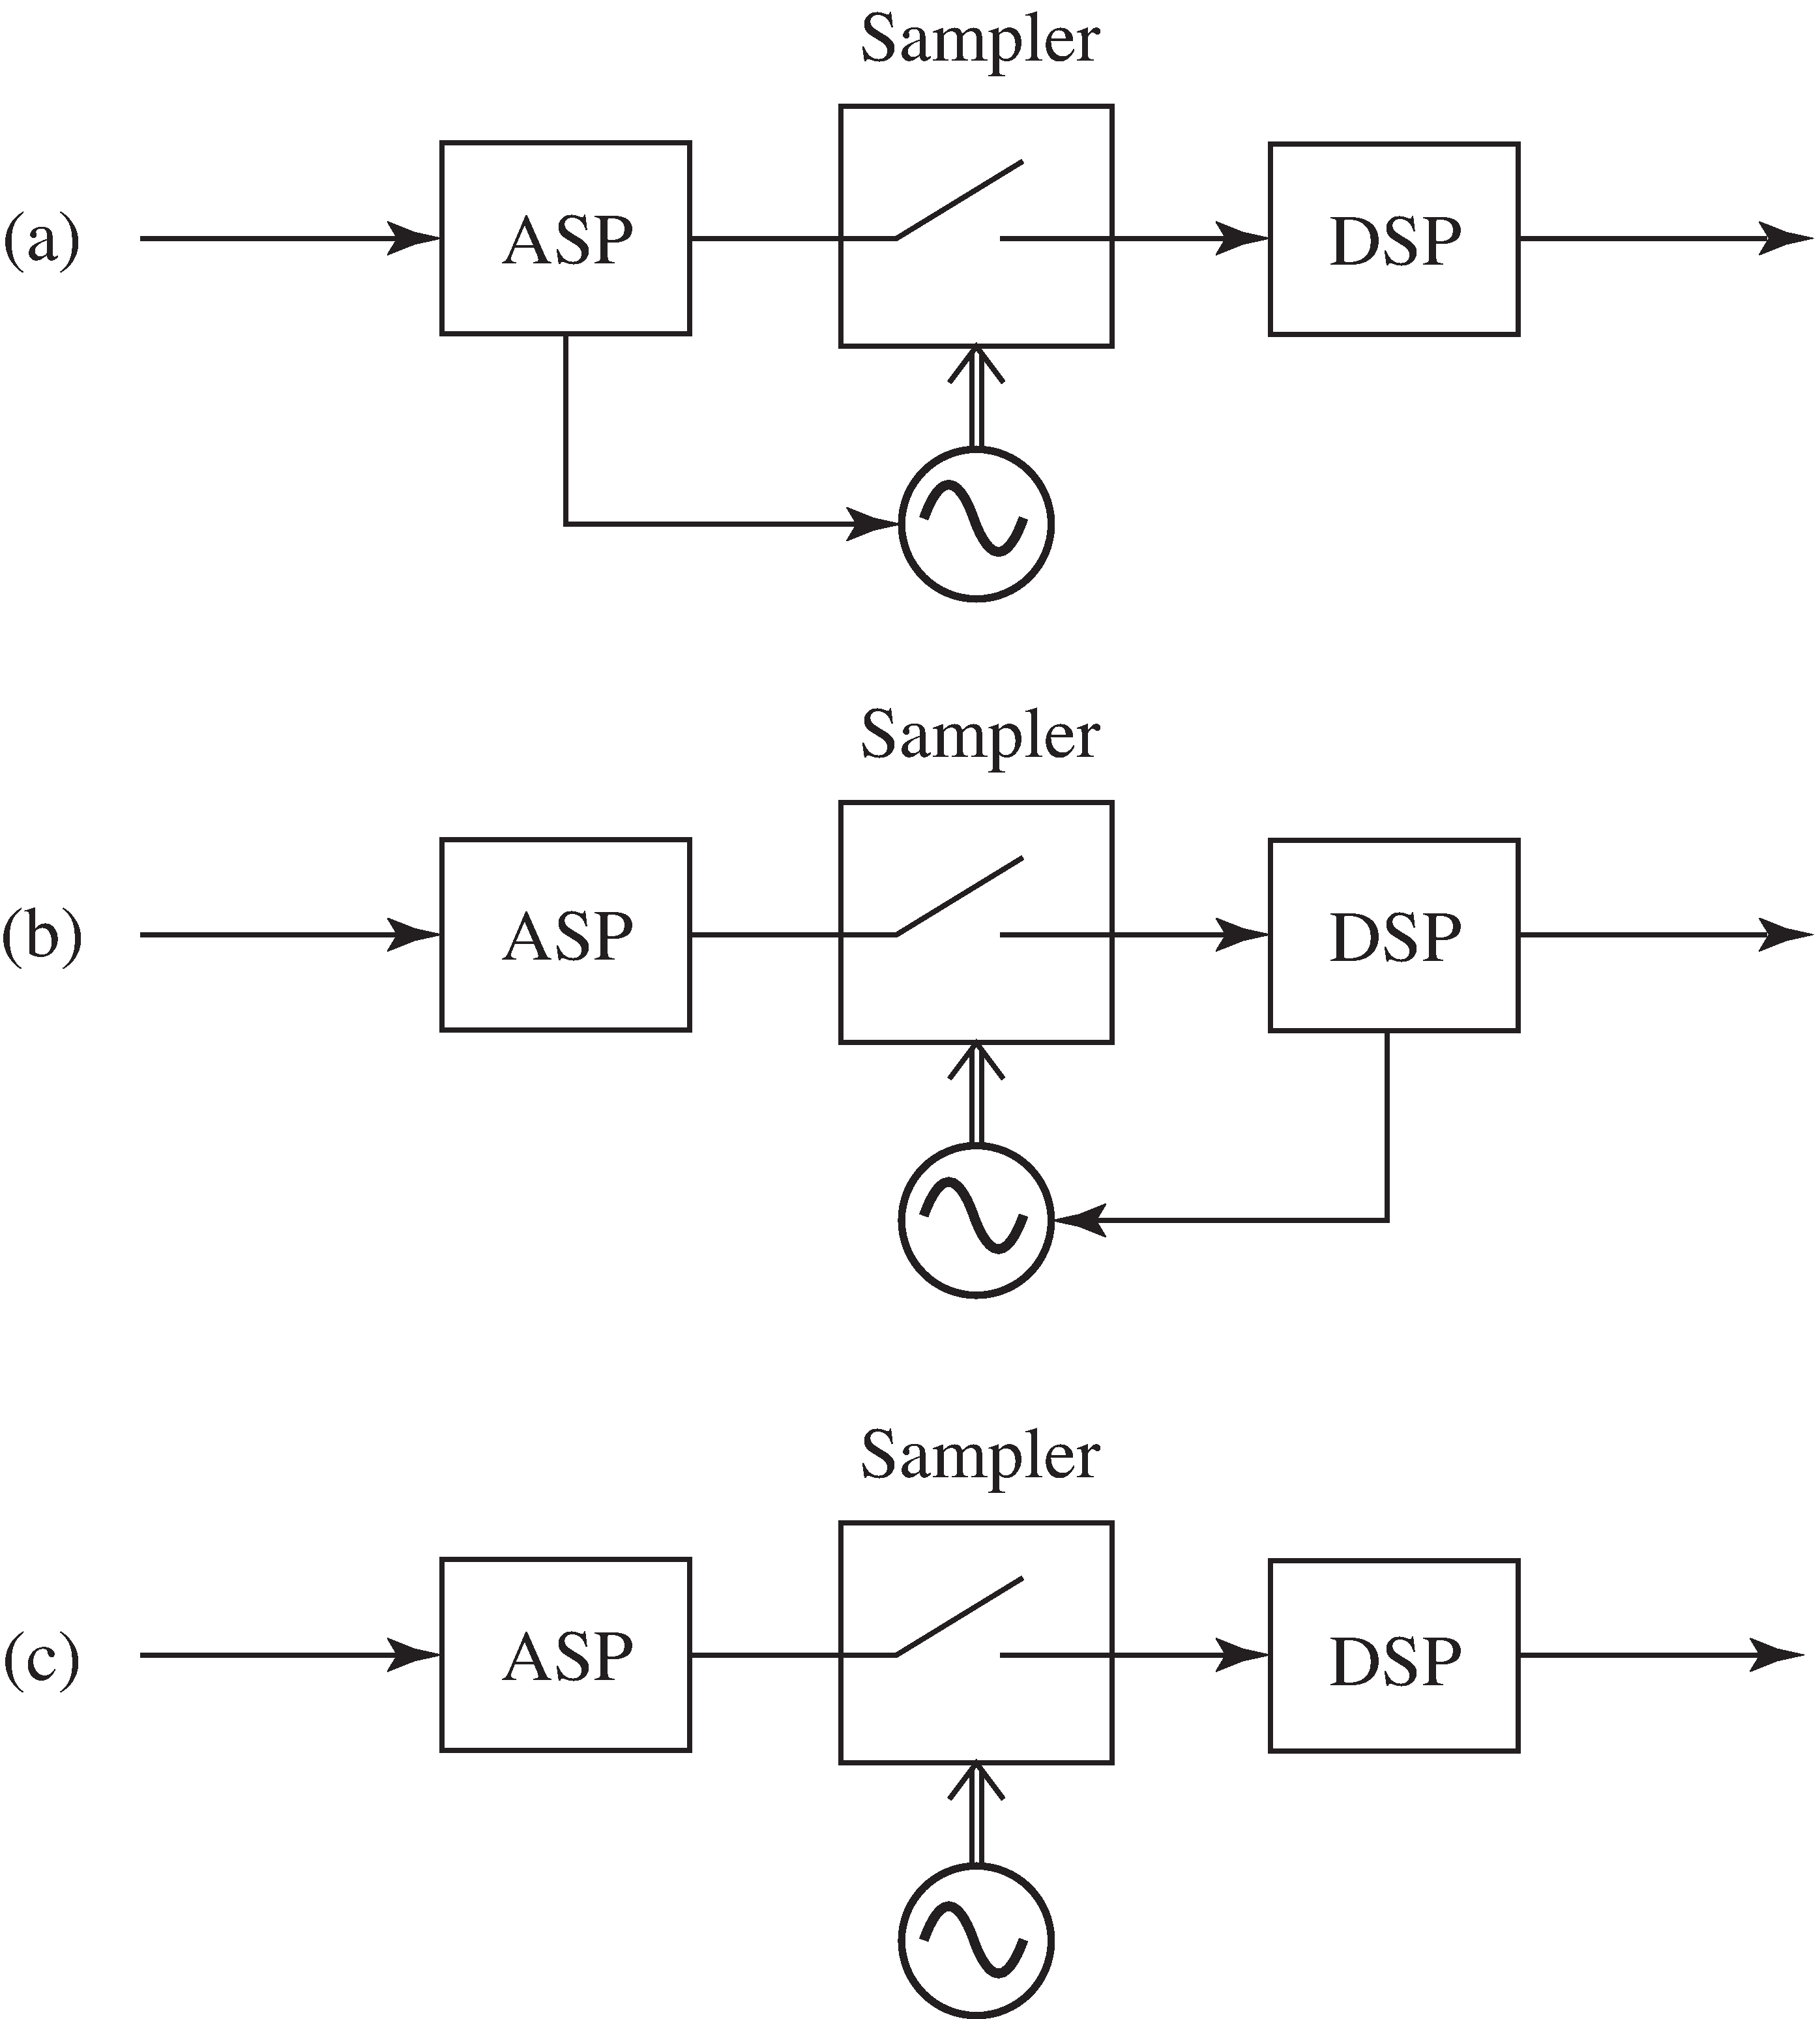 Three generic structures for timing recovery. In (a), an analog processor determines when the sampling instants will occur. In (b), a digital post processor is used to determine when to sample. In (c), the sampling instants are chosen by a free running clock, and digital post processing is used to recover the values of the received signal that would have occurred at the optimal sampling instants.